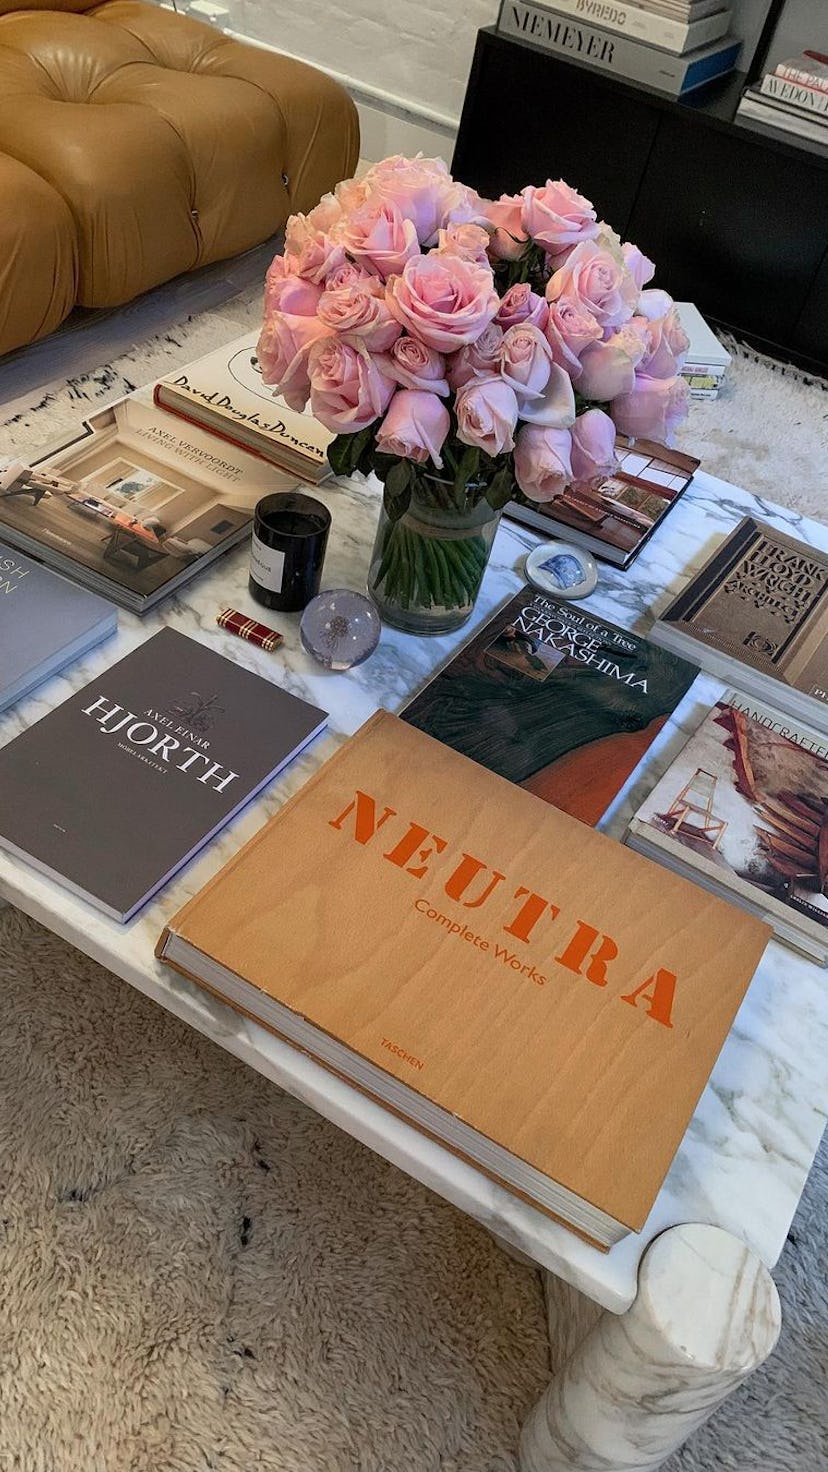 A coffee table, a vase of pink roses and various coffee table books taking up the whole table